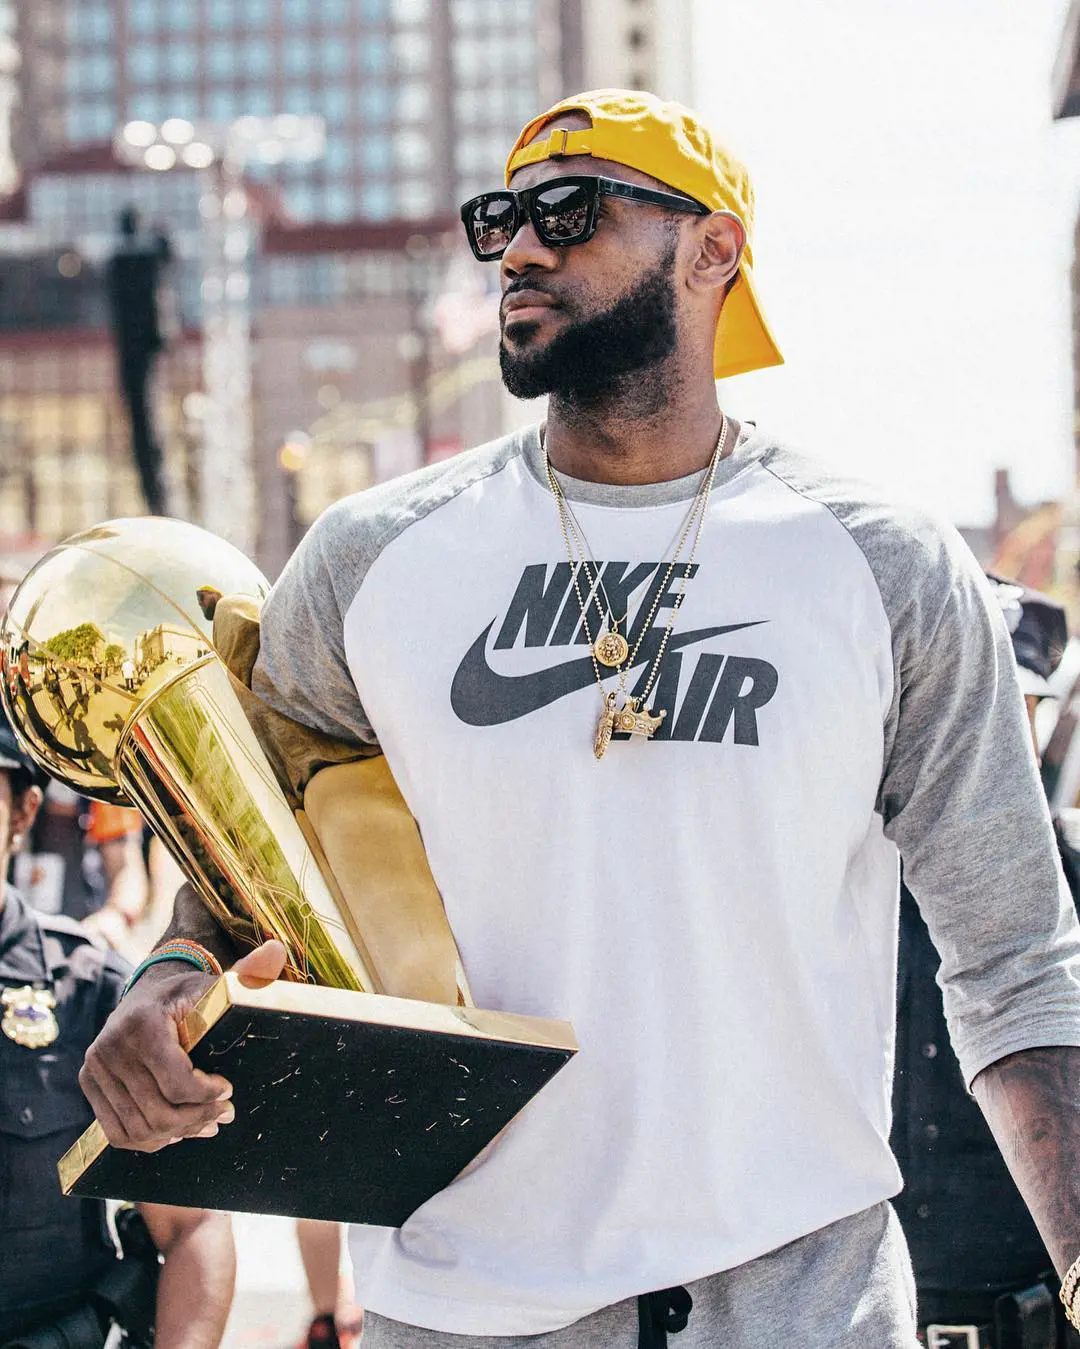 LeBron James holds his championship trophy while sporting a Nike Air t-shirt